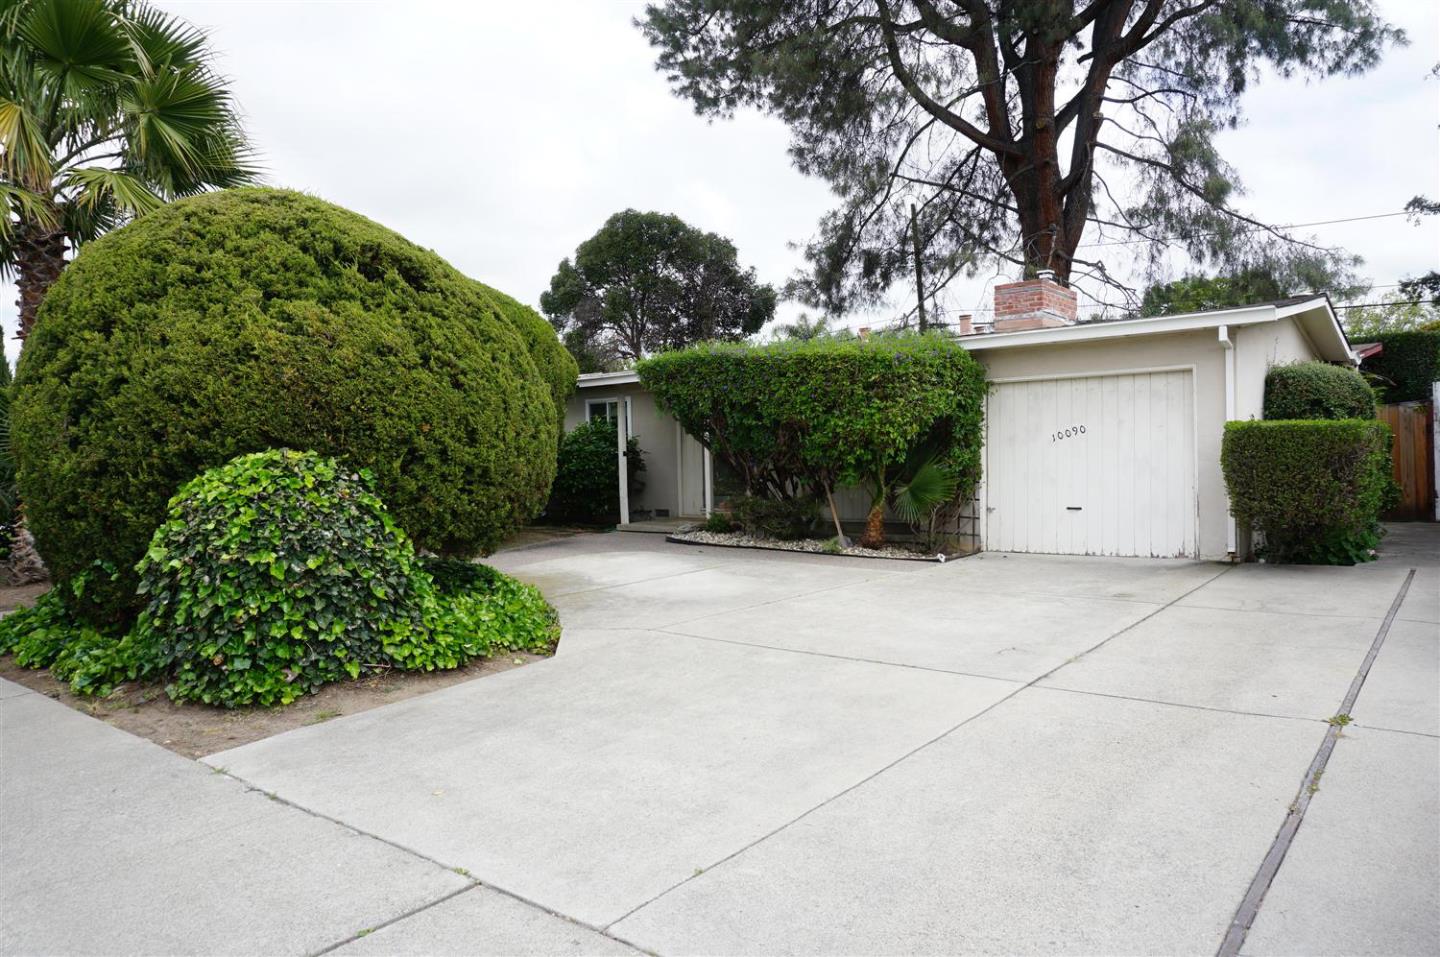 Photo of 10090 Lyndale Ave in San Jose, CA